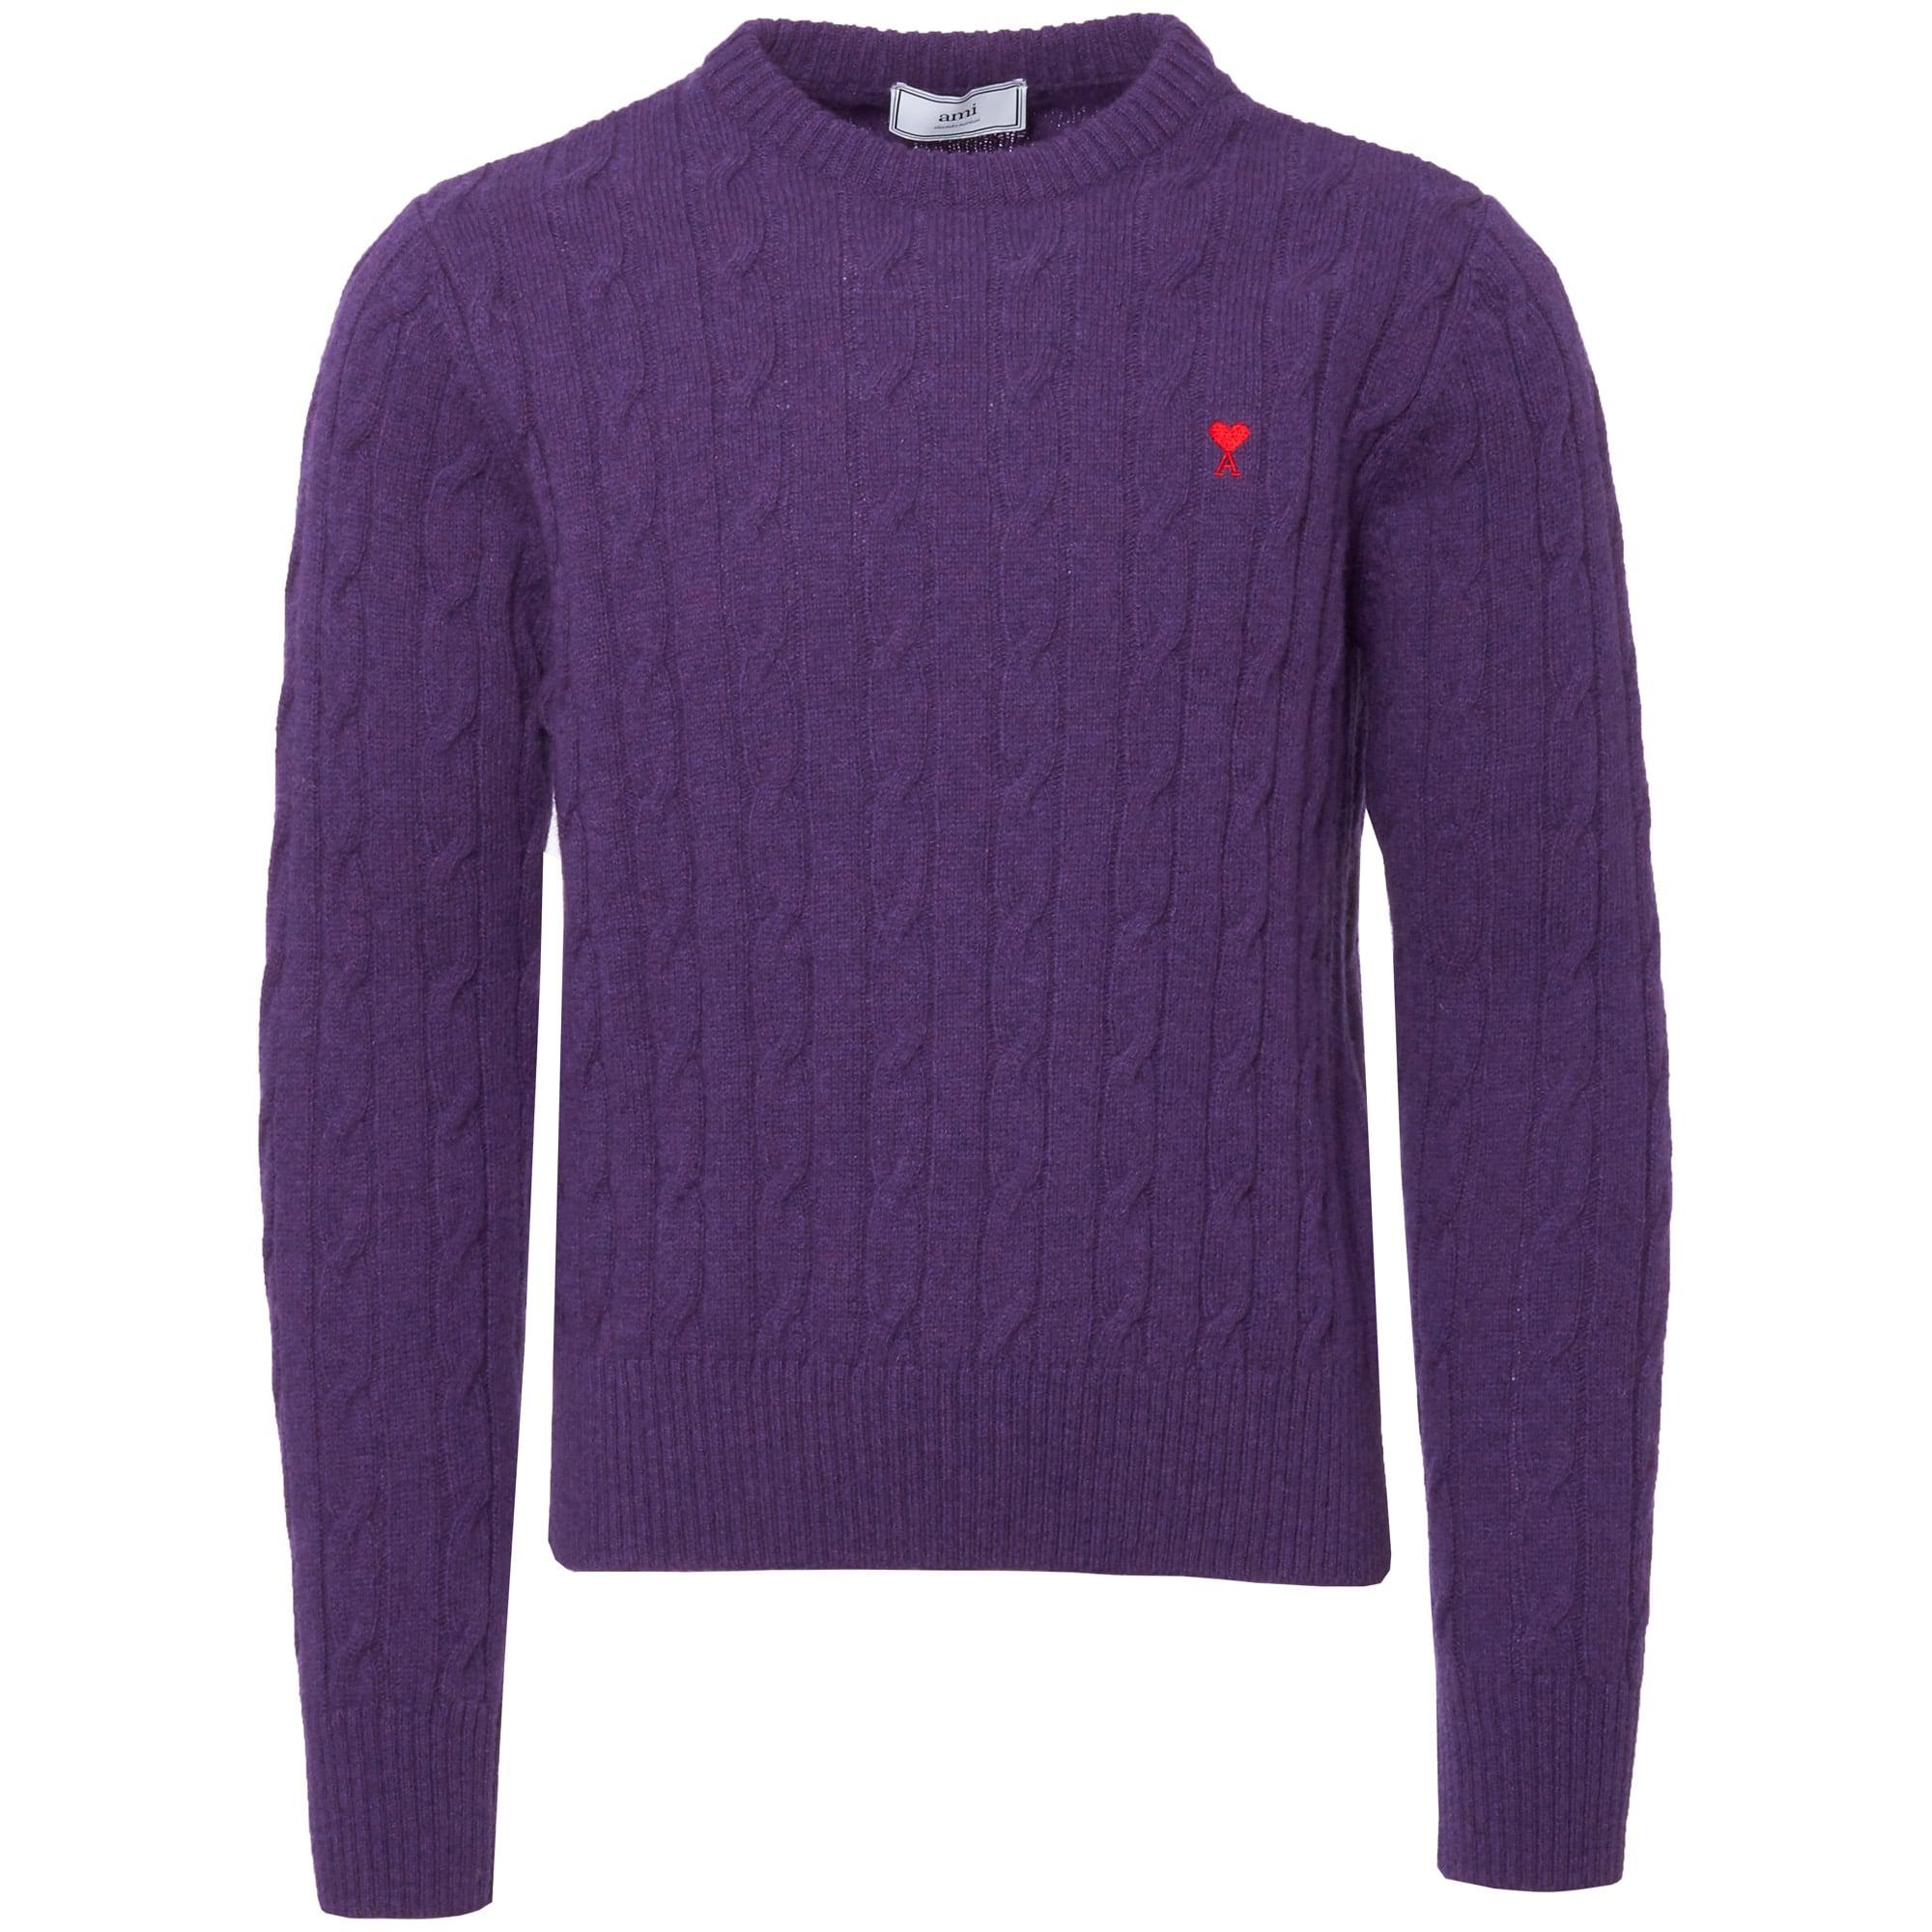 Ami Purple Cable-knit Sweater in Purple for Men - Save 27% | Lyst